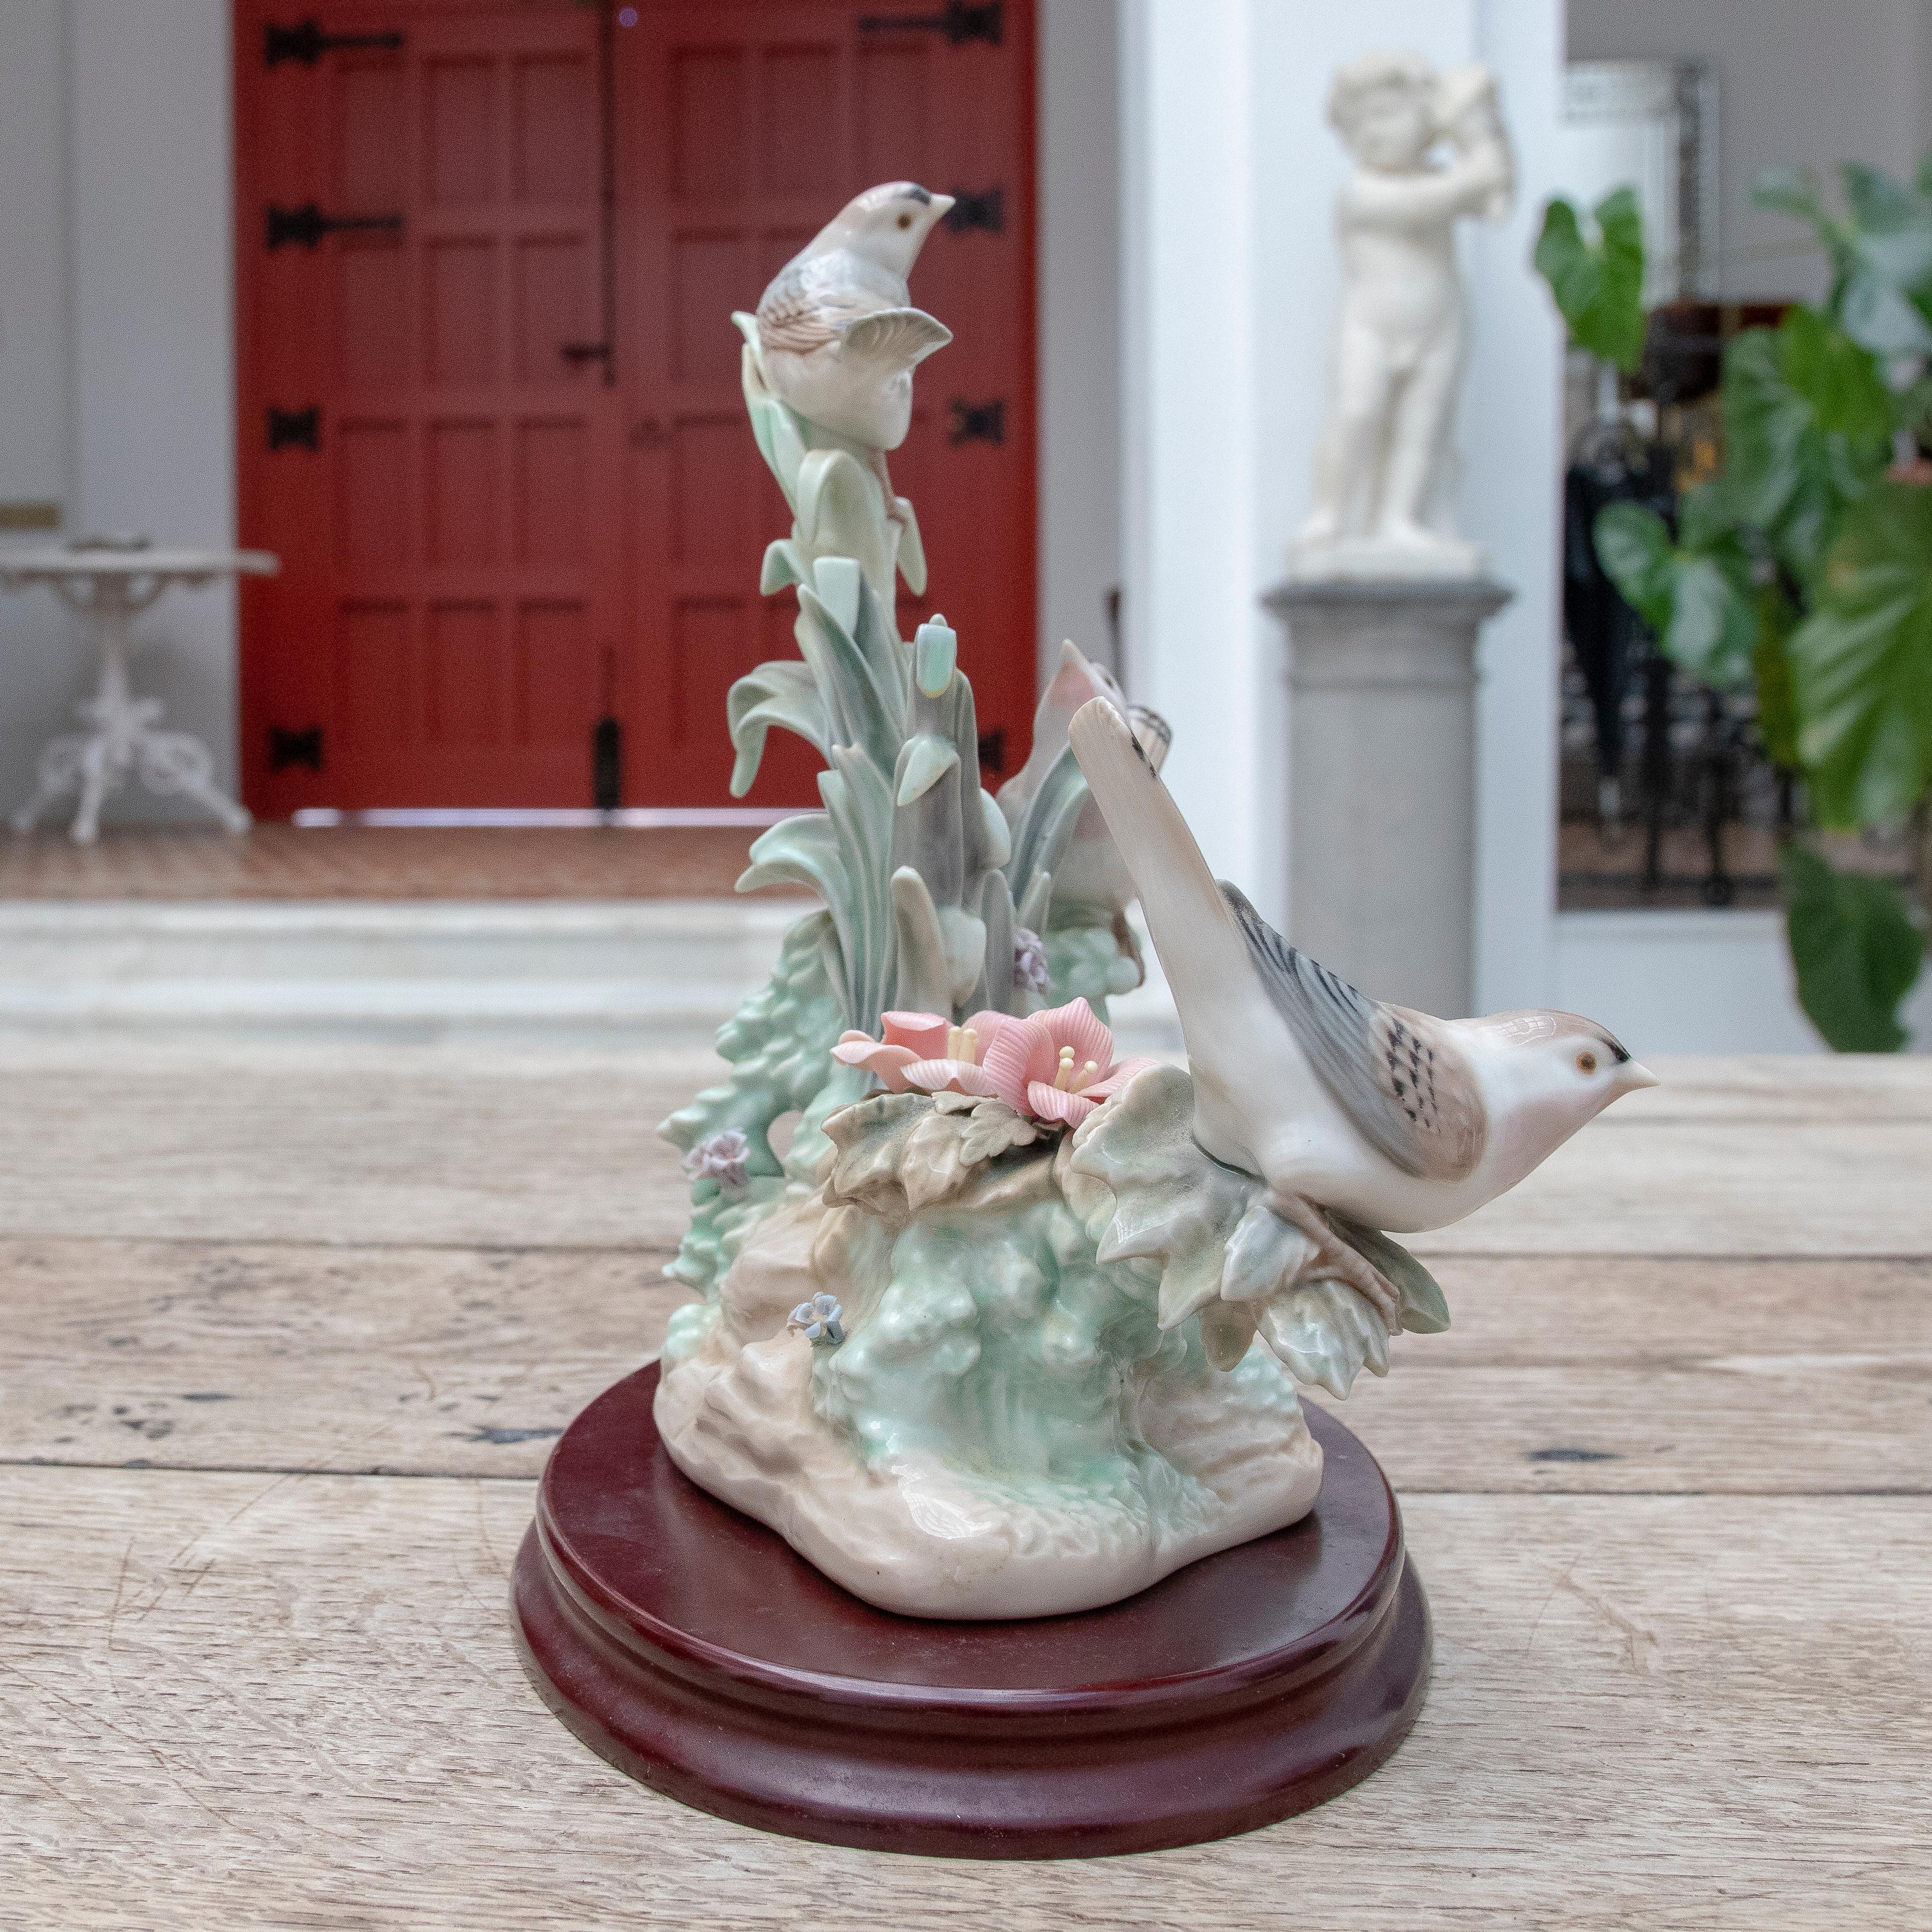 Spanish Lladró Porcelain Figurine of a Group of Birds Dated from 1978 For Sale